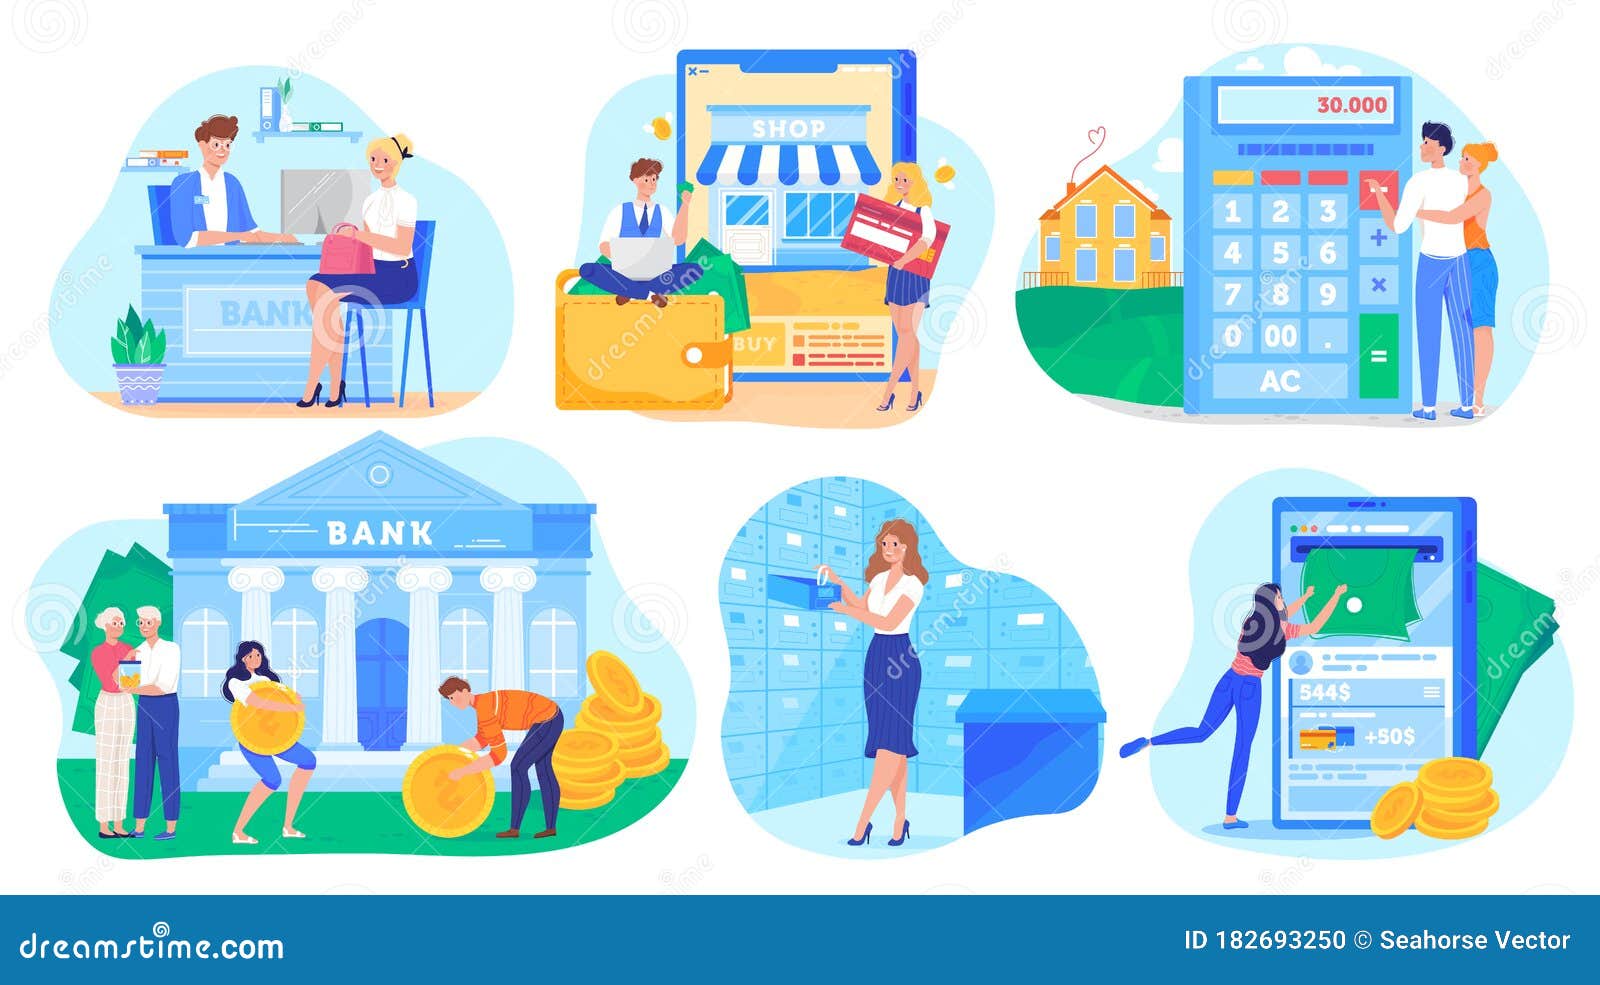 Banking Concept, People Cartoon Characters Saving Money and Shopping  Online, Vector Illustration Stock Vector - Illustration of commerce, coin:  182693250